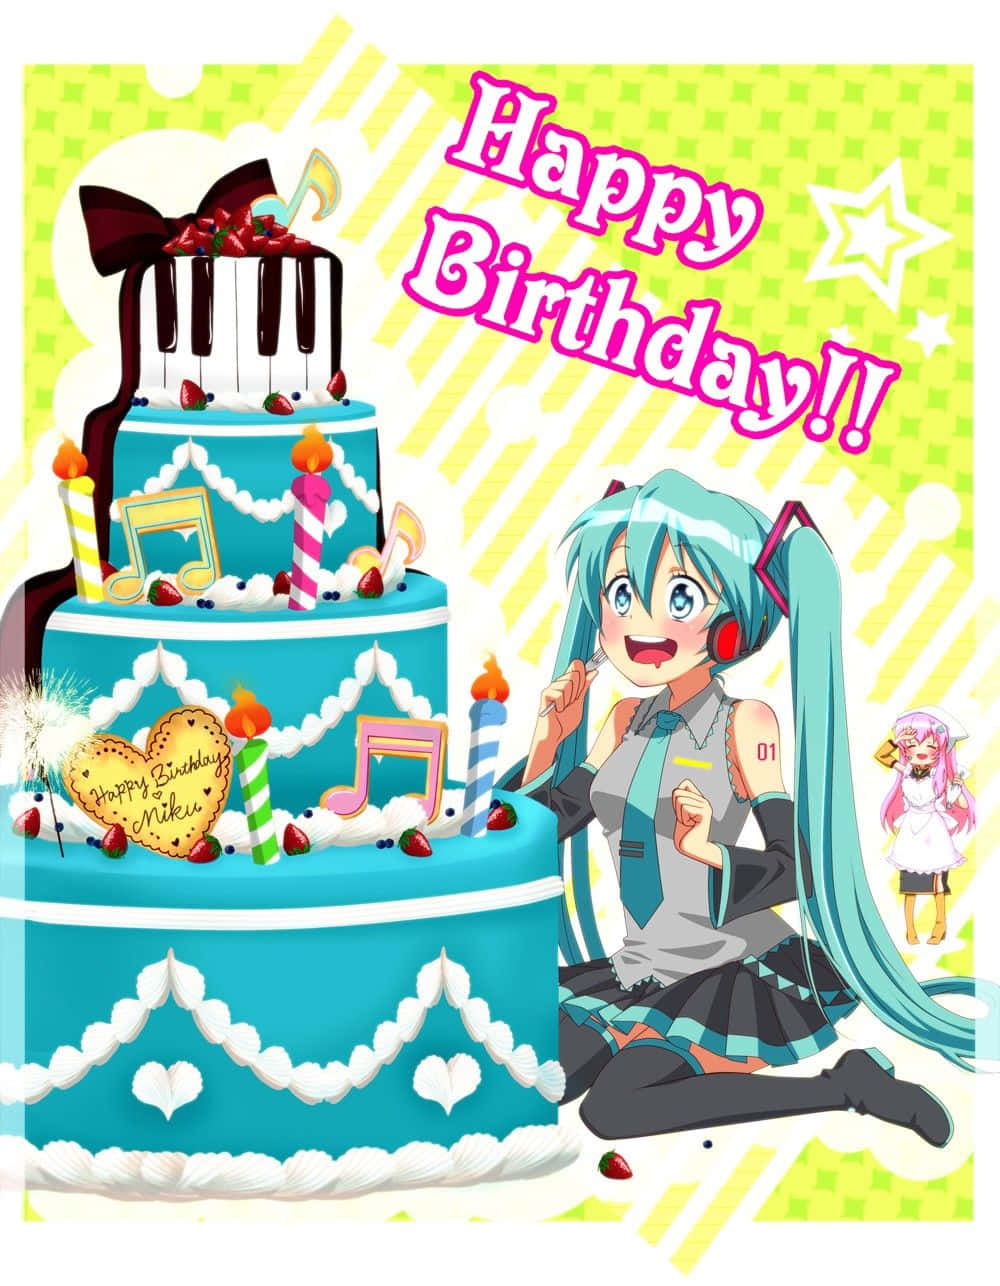 Image  Celebrate your birthday Anime style! Wallpaper